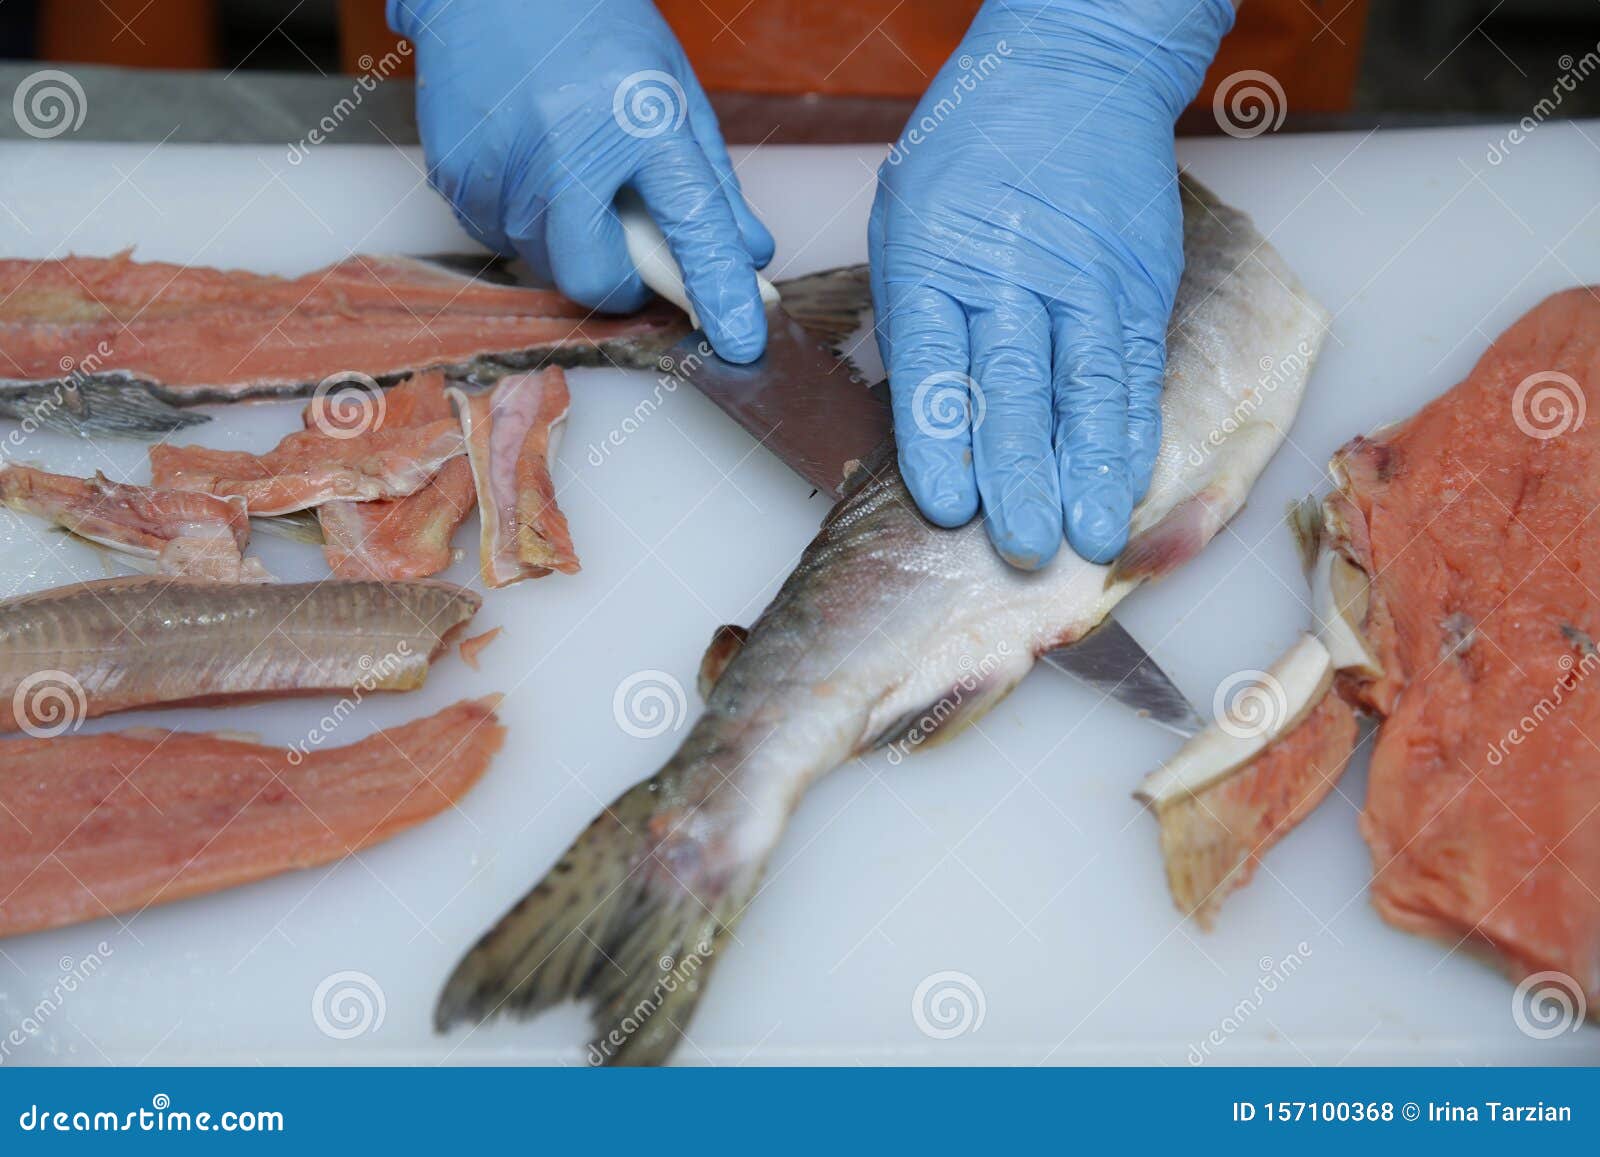 Professional Cutting of Raw Red Salmon Fish. Hands with a Knife